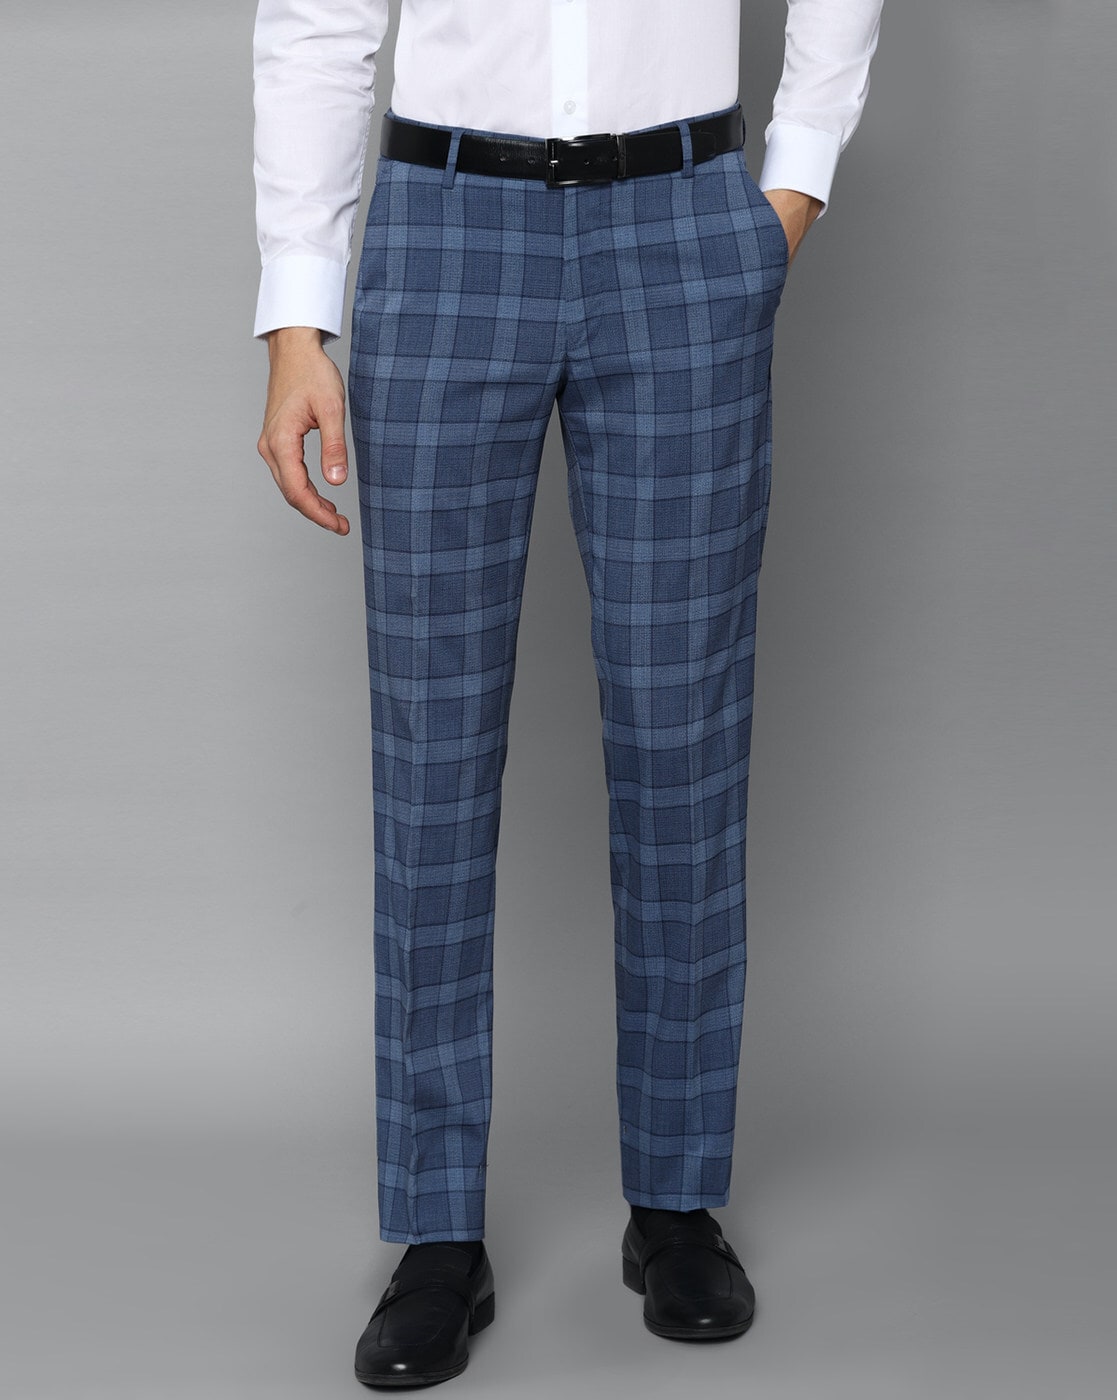 The Side Zip Straight Pant in Plaid